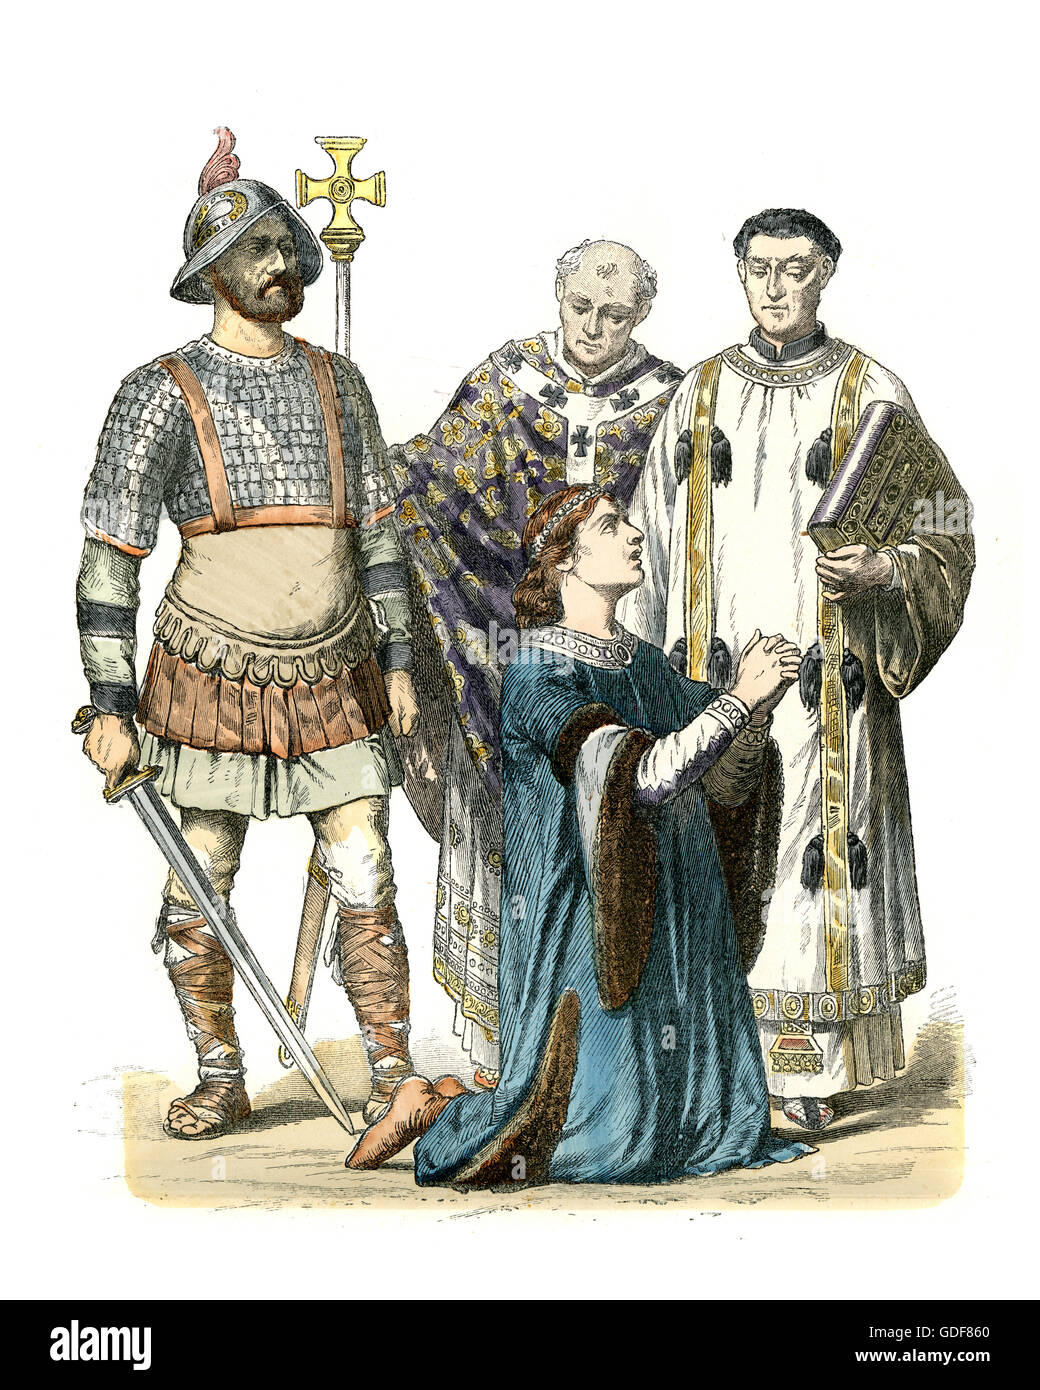 Costumes of the Carolingian era, 700 to 800 AD, Warrior, Priests and Noblewoman Stock Photo